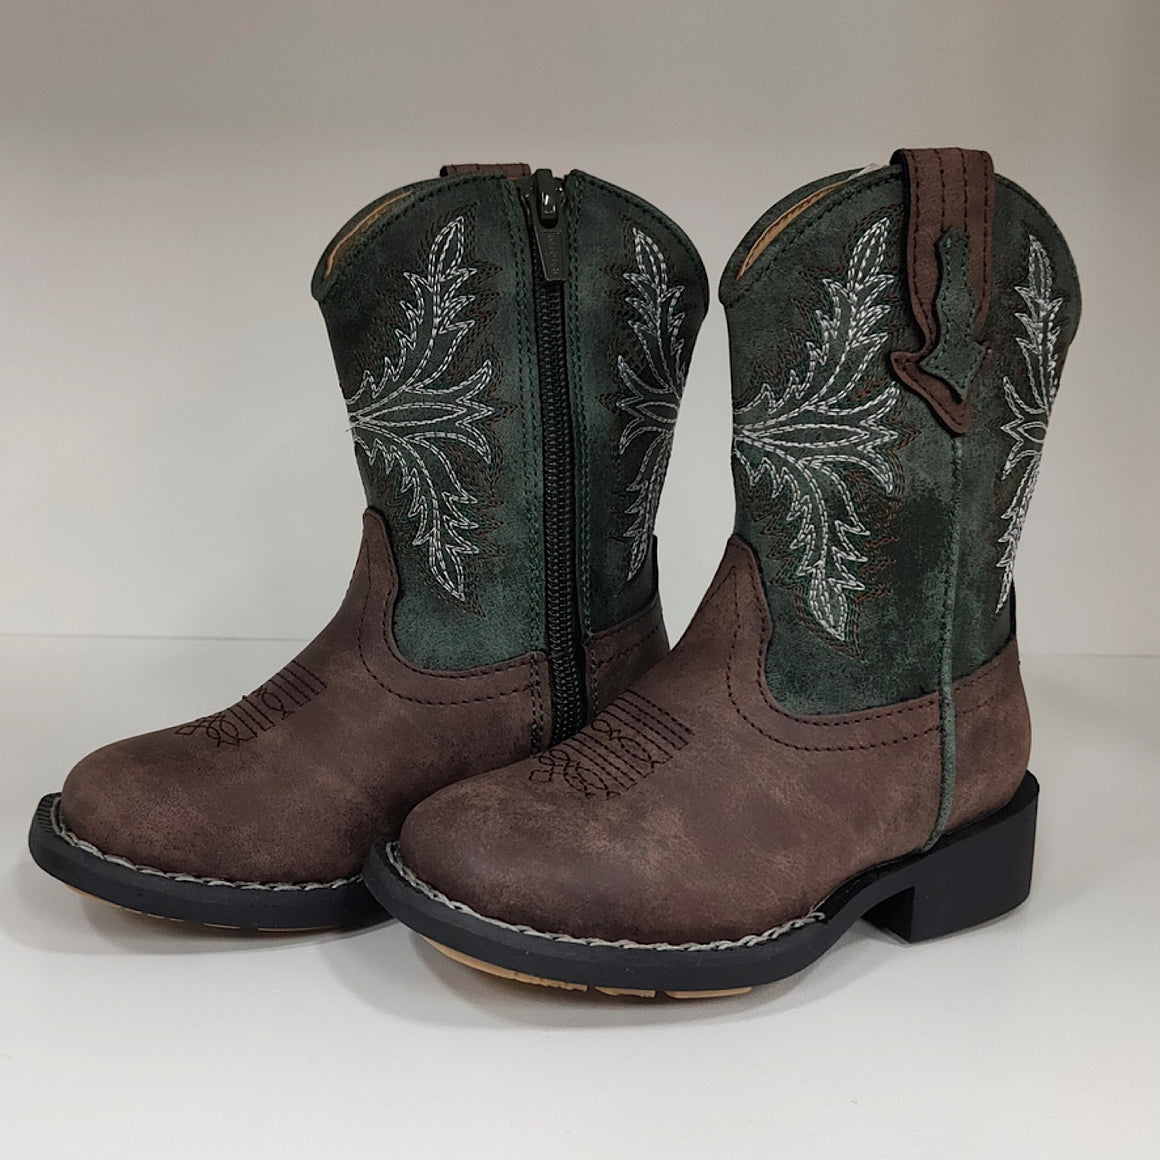 Roper TODDLER Jed Western Boots Brown/Green